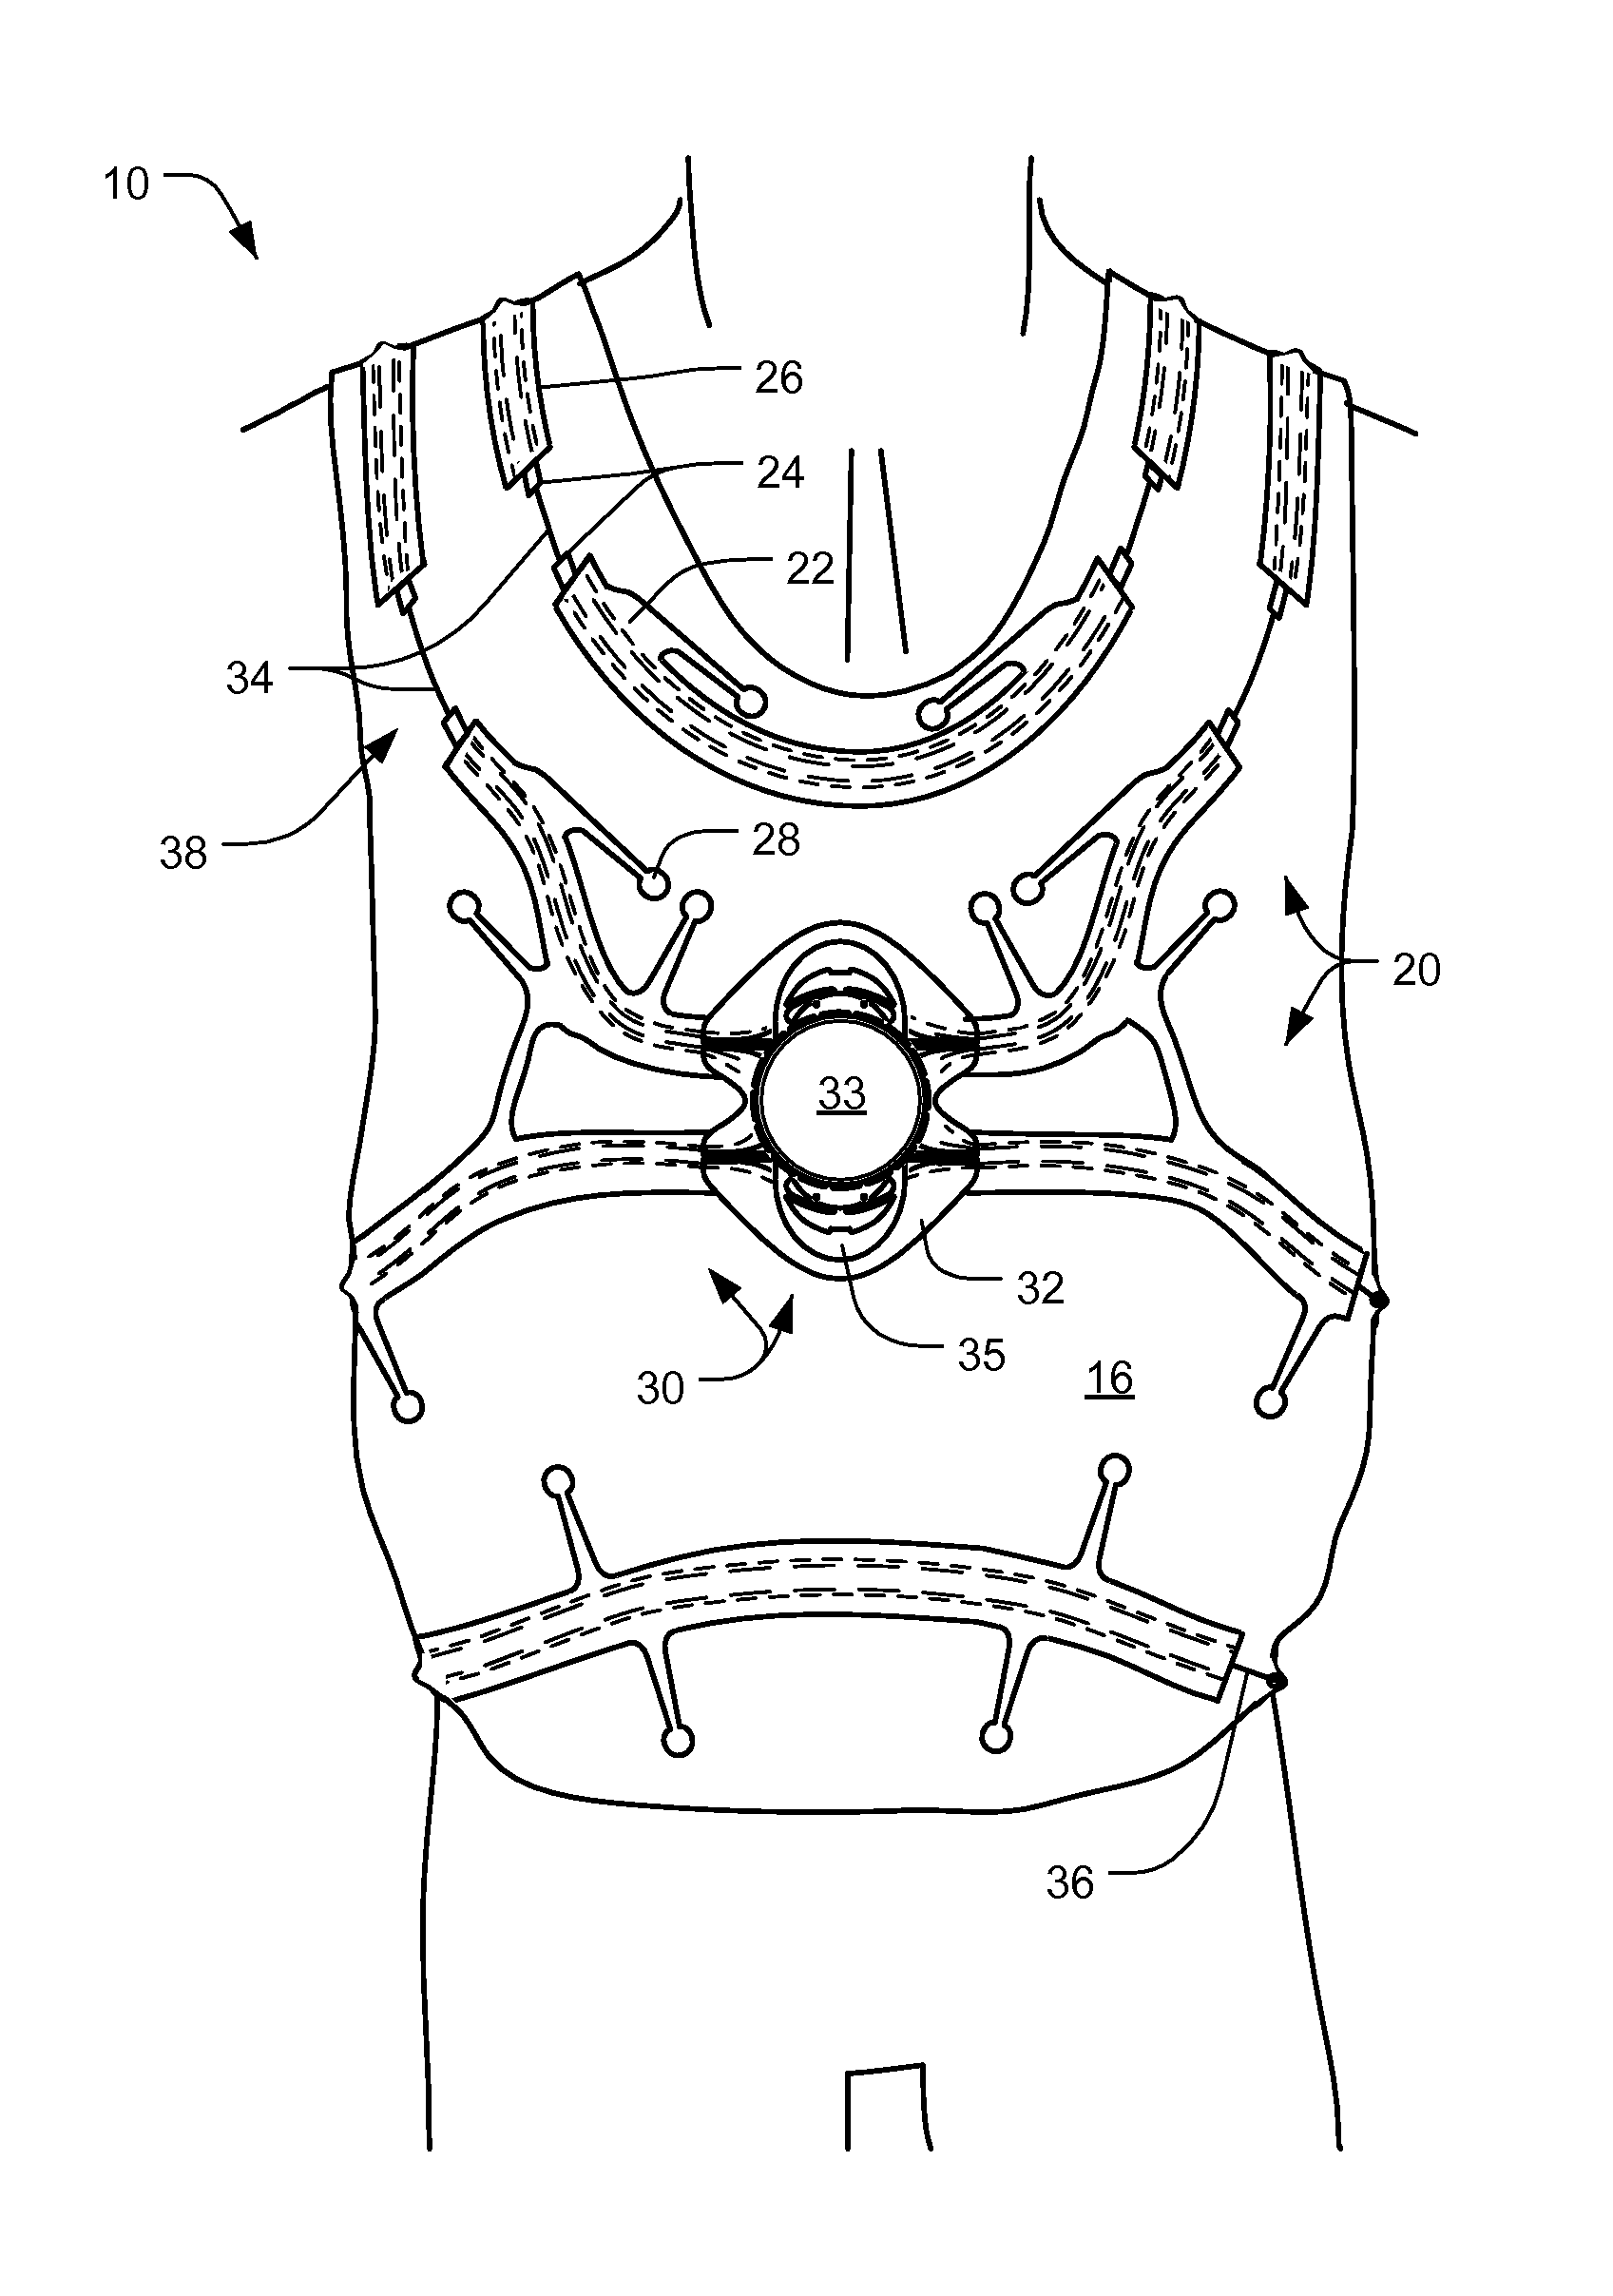 Adjustably fitted protective apparel with rotary tension adjuster